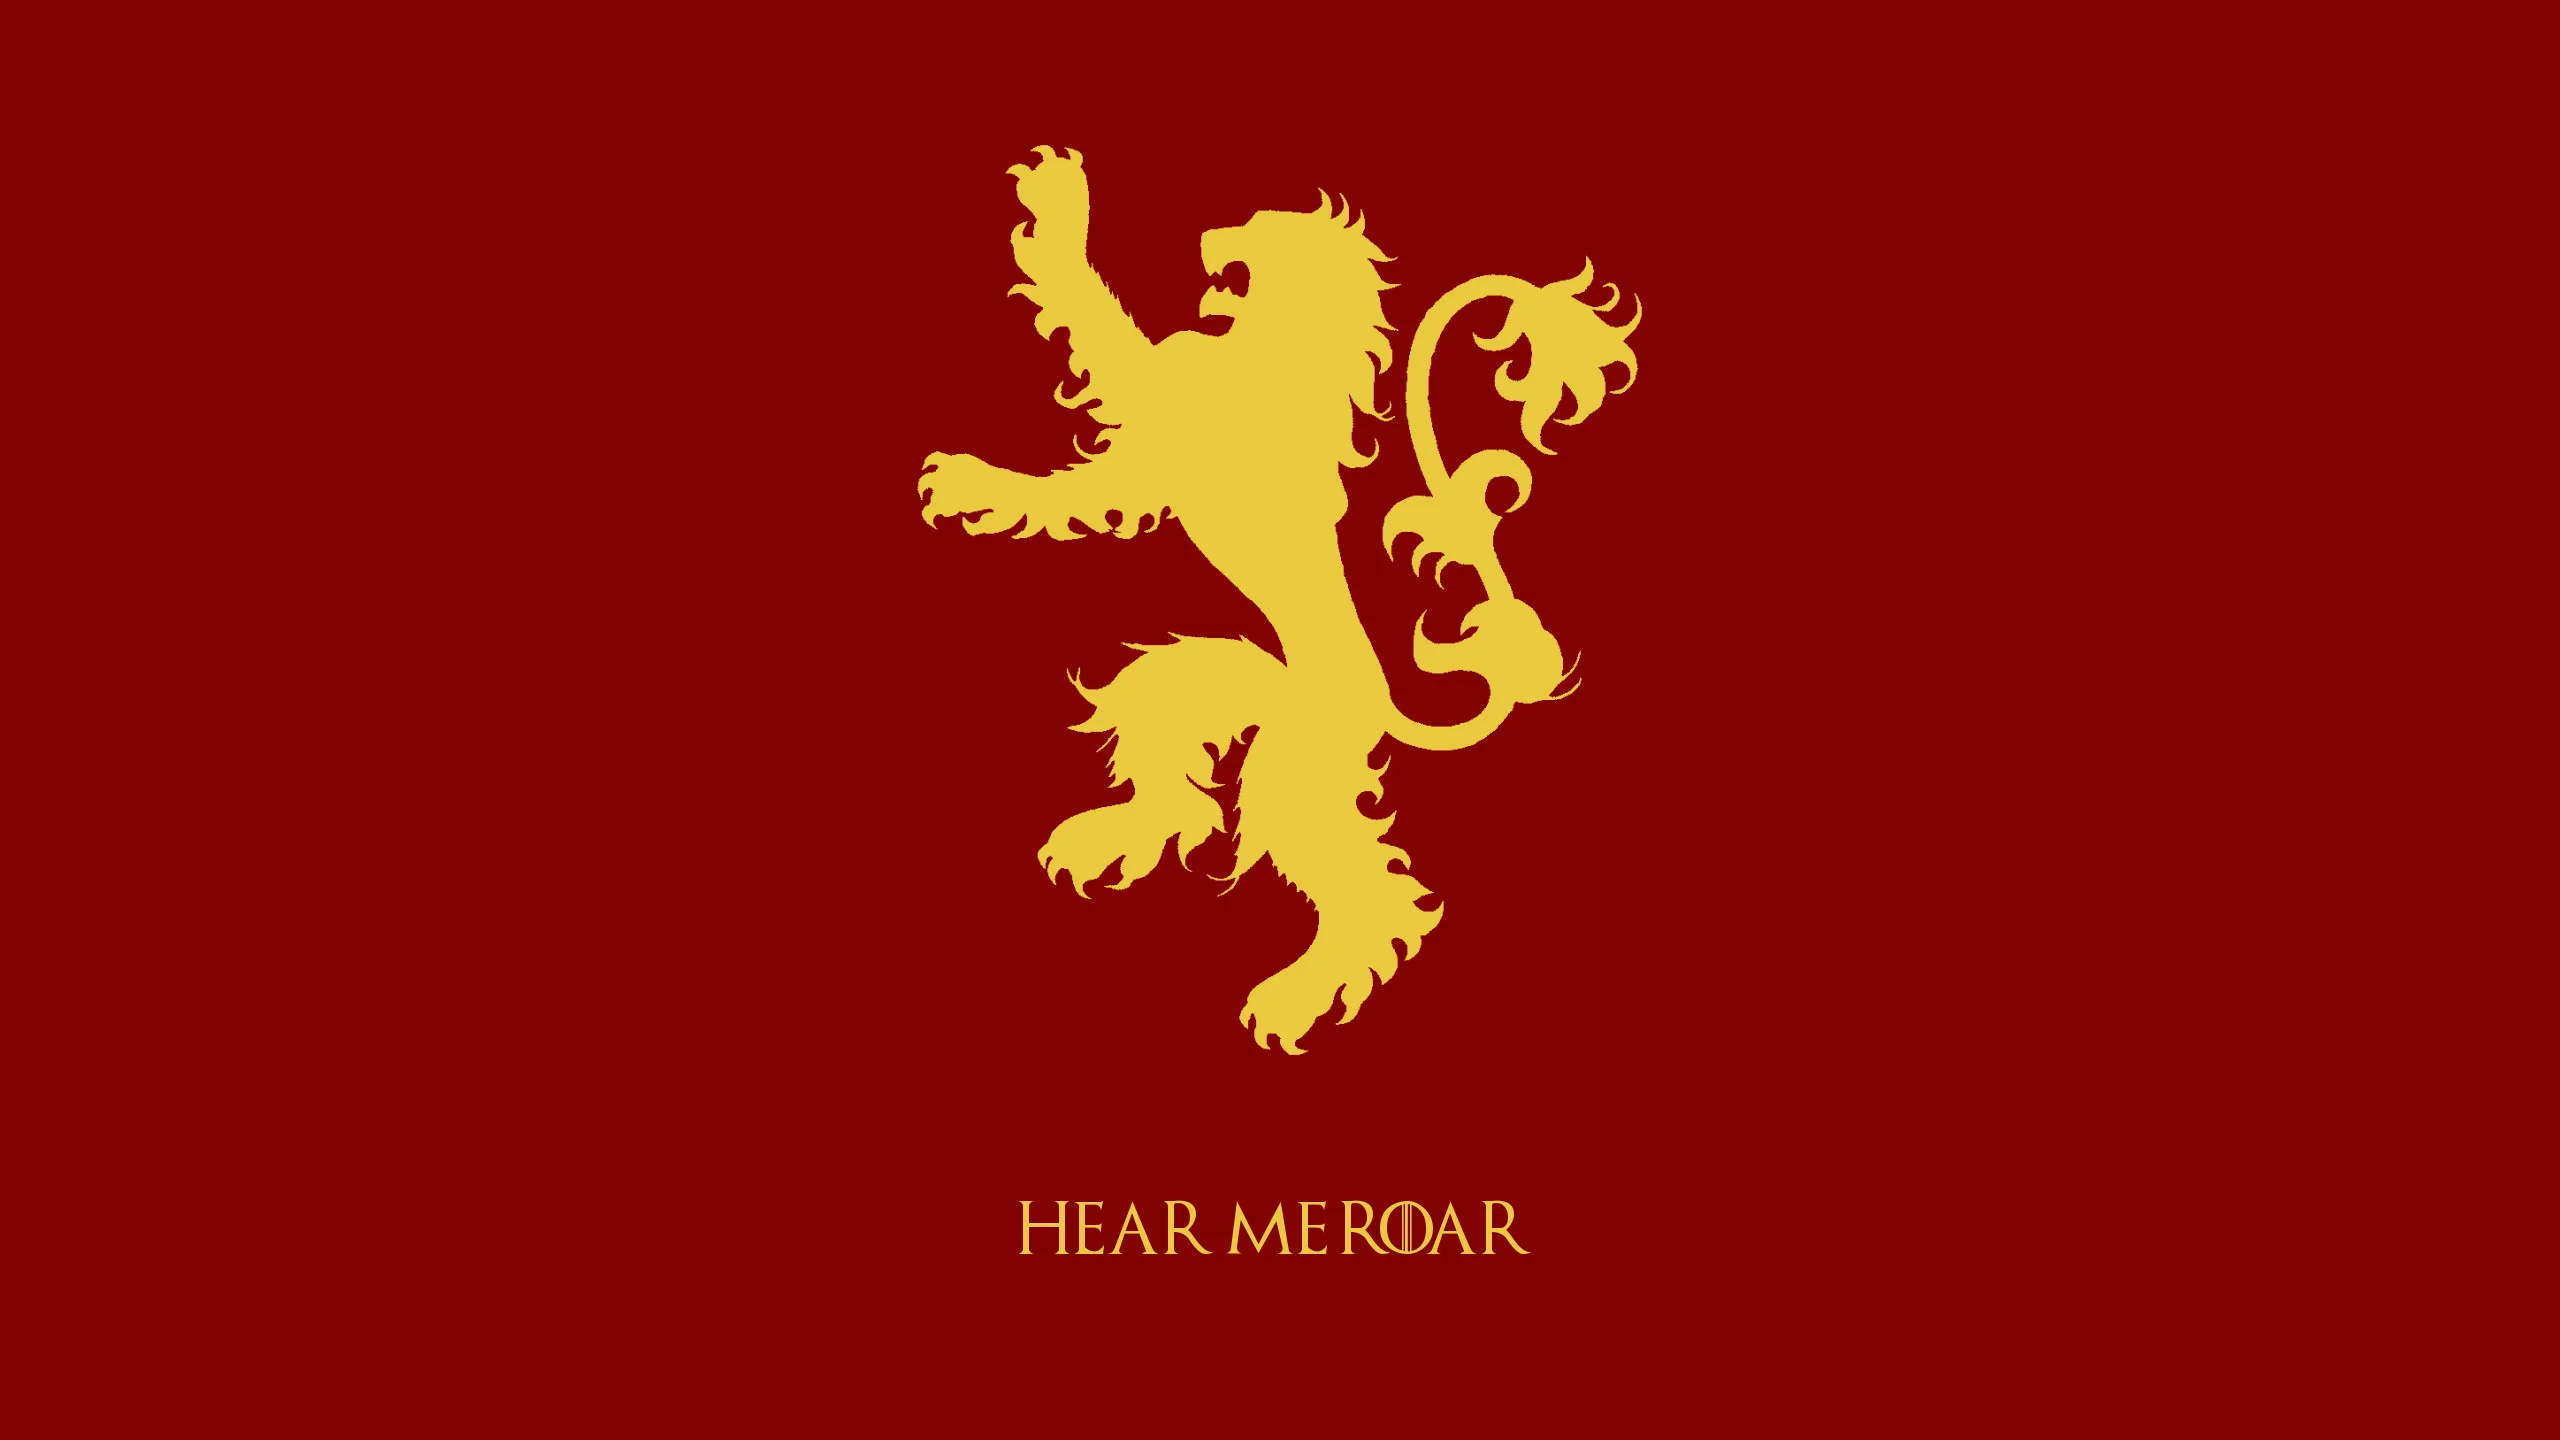 Game of Thrones Wallpapers – House Sigils (2560 x 1440) – Album on Imgur